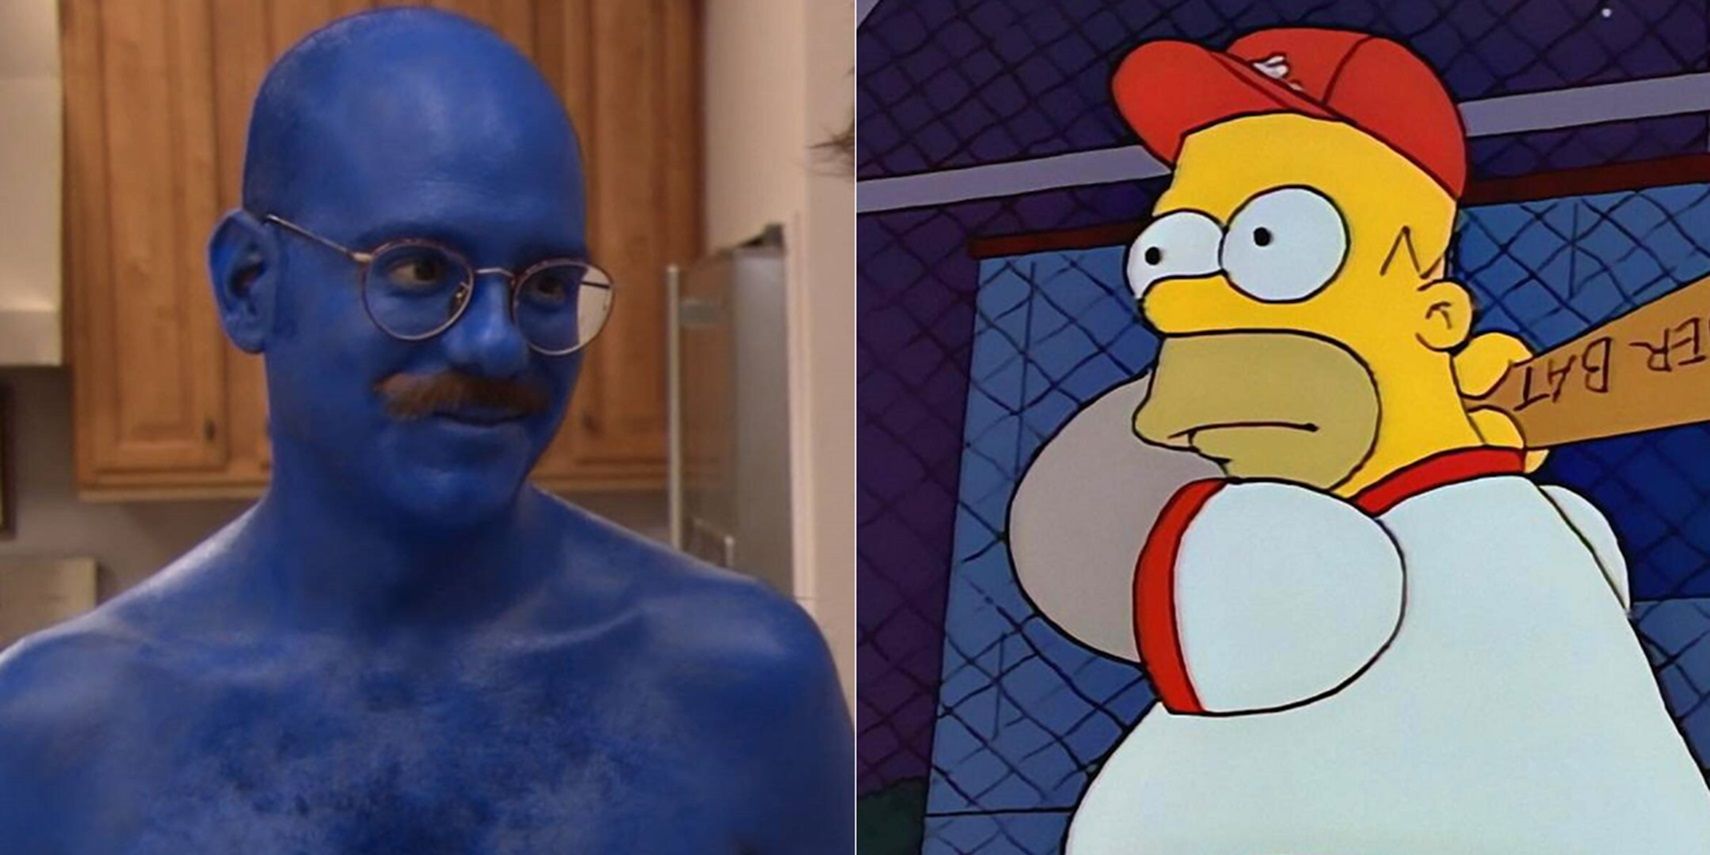 Tobias painted blue in Arrested Development and Homer at the bat in The Simpsons